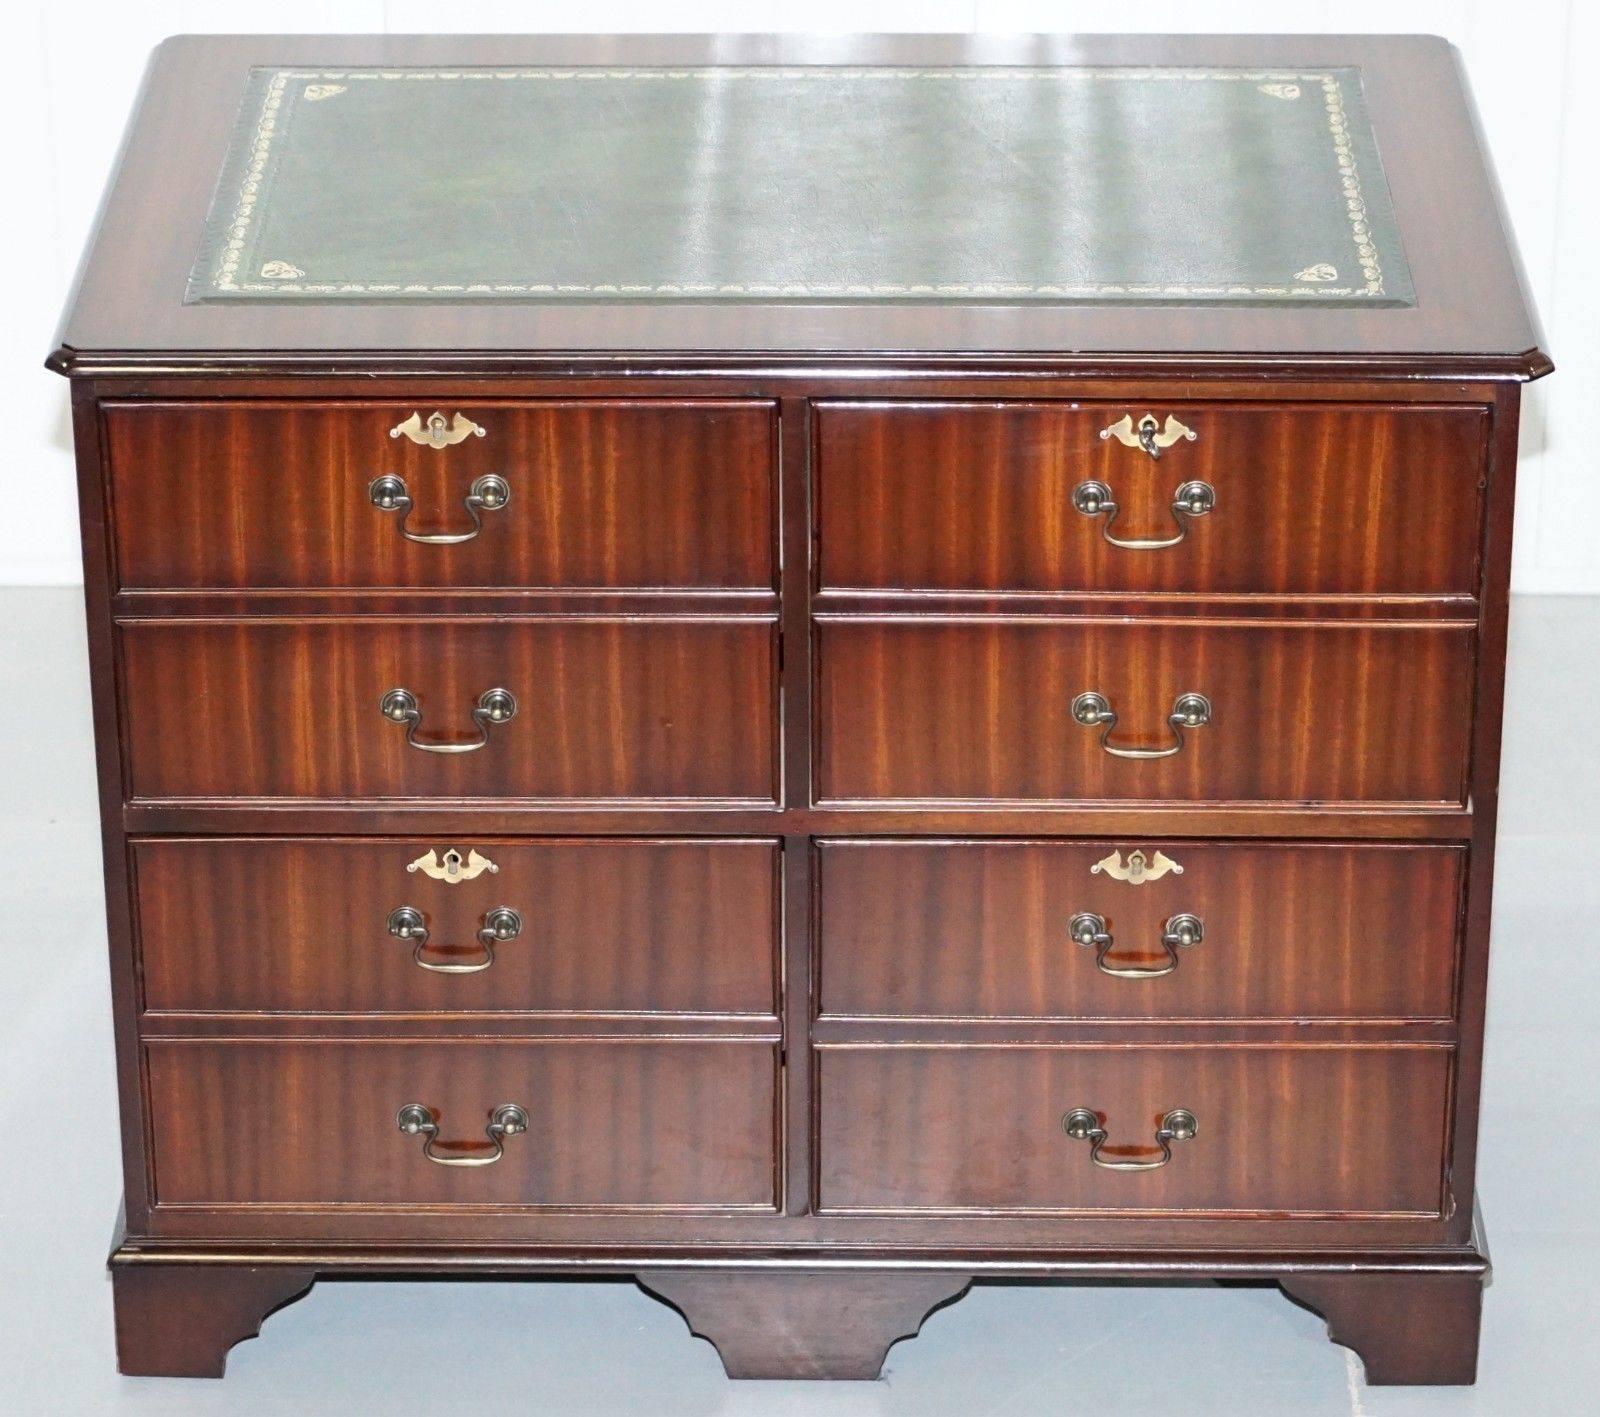 We are delighted to offer for sale this a very good looking flamed mahogany twin pedestal filing cabinet with green leather gold tooled top

A very good looking and well-made piece, designed to match the twin pedestal desk, a number of which I